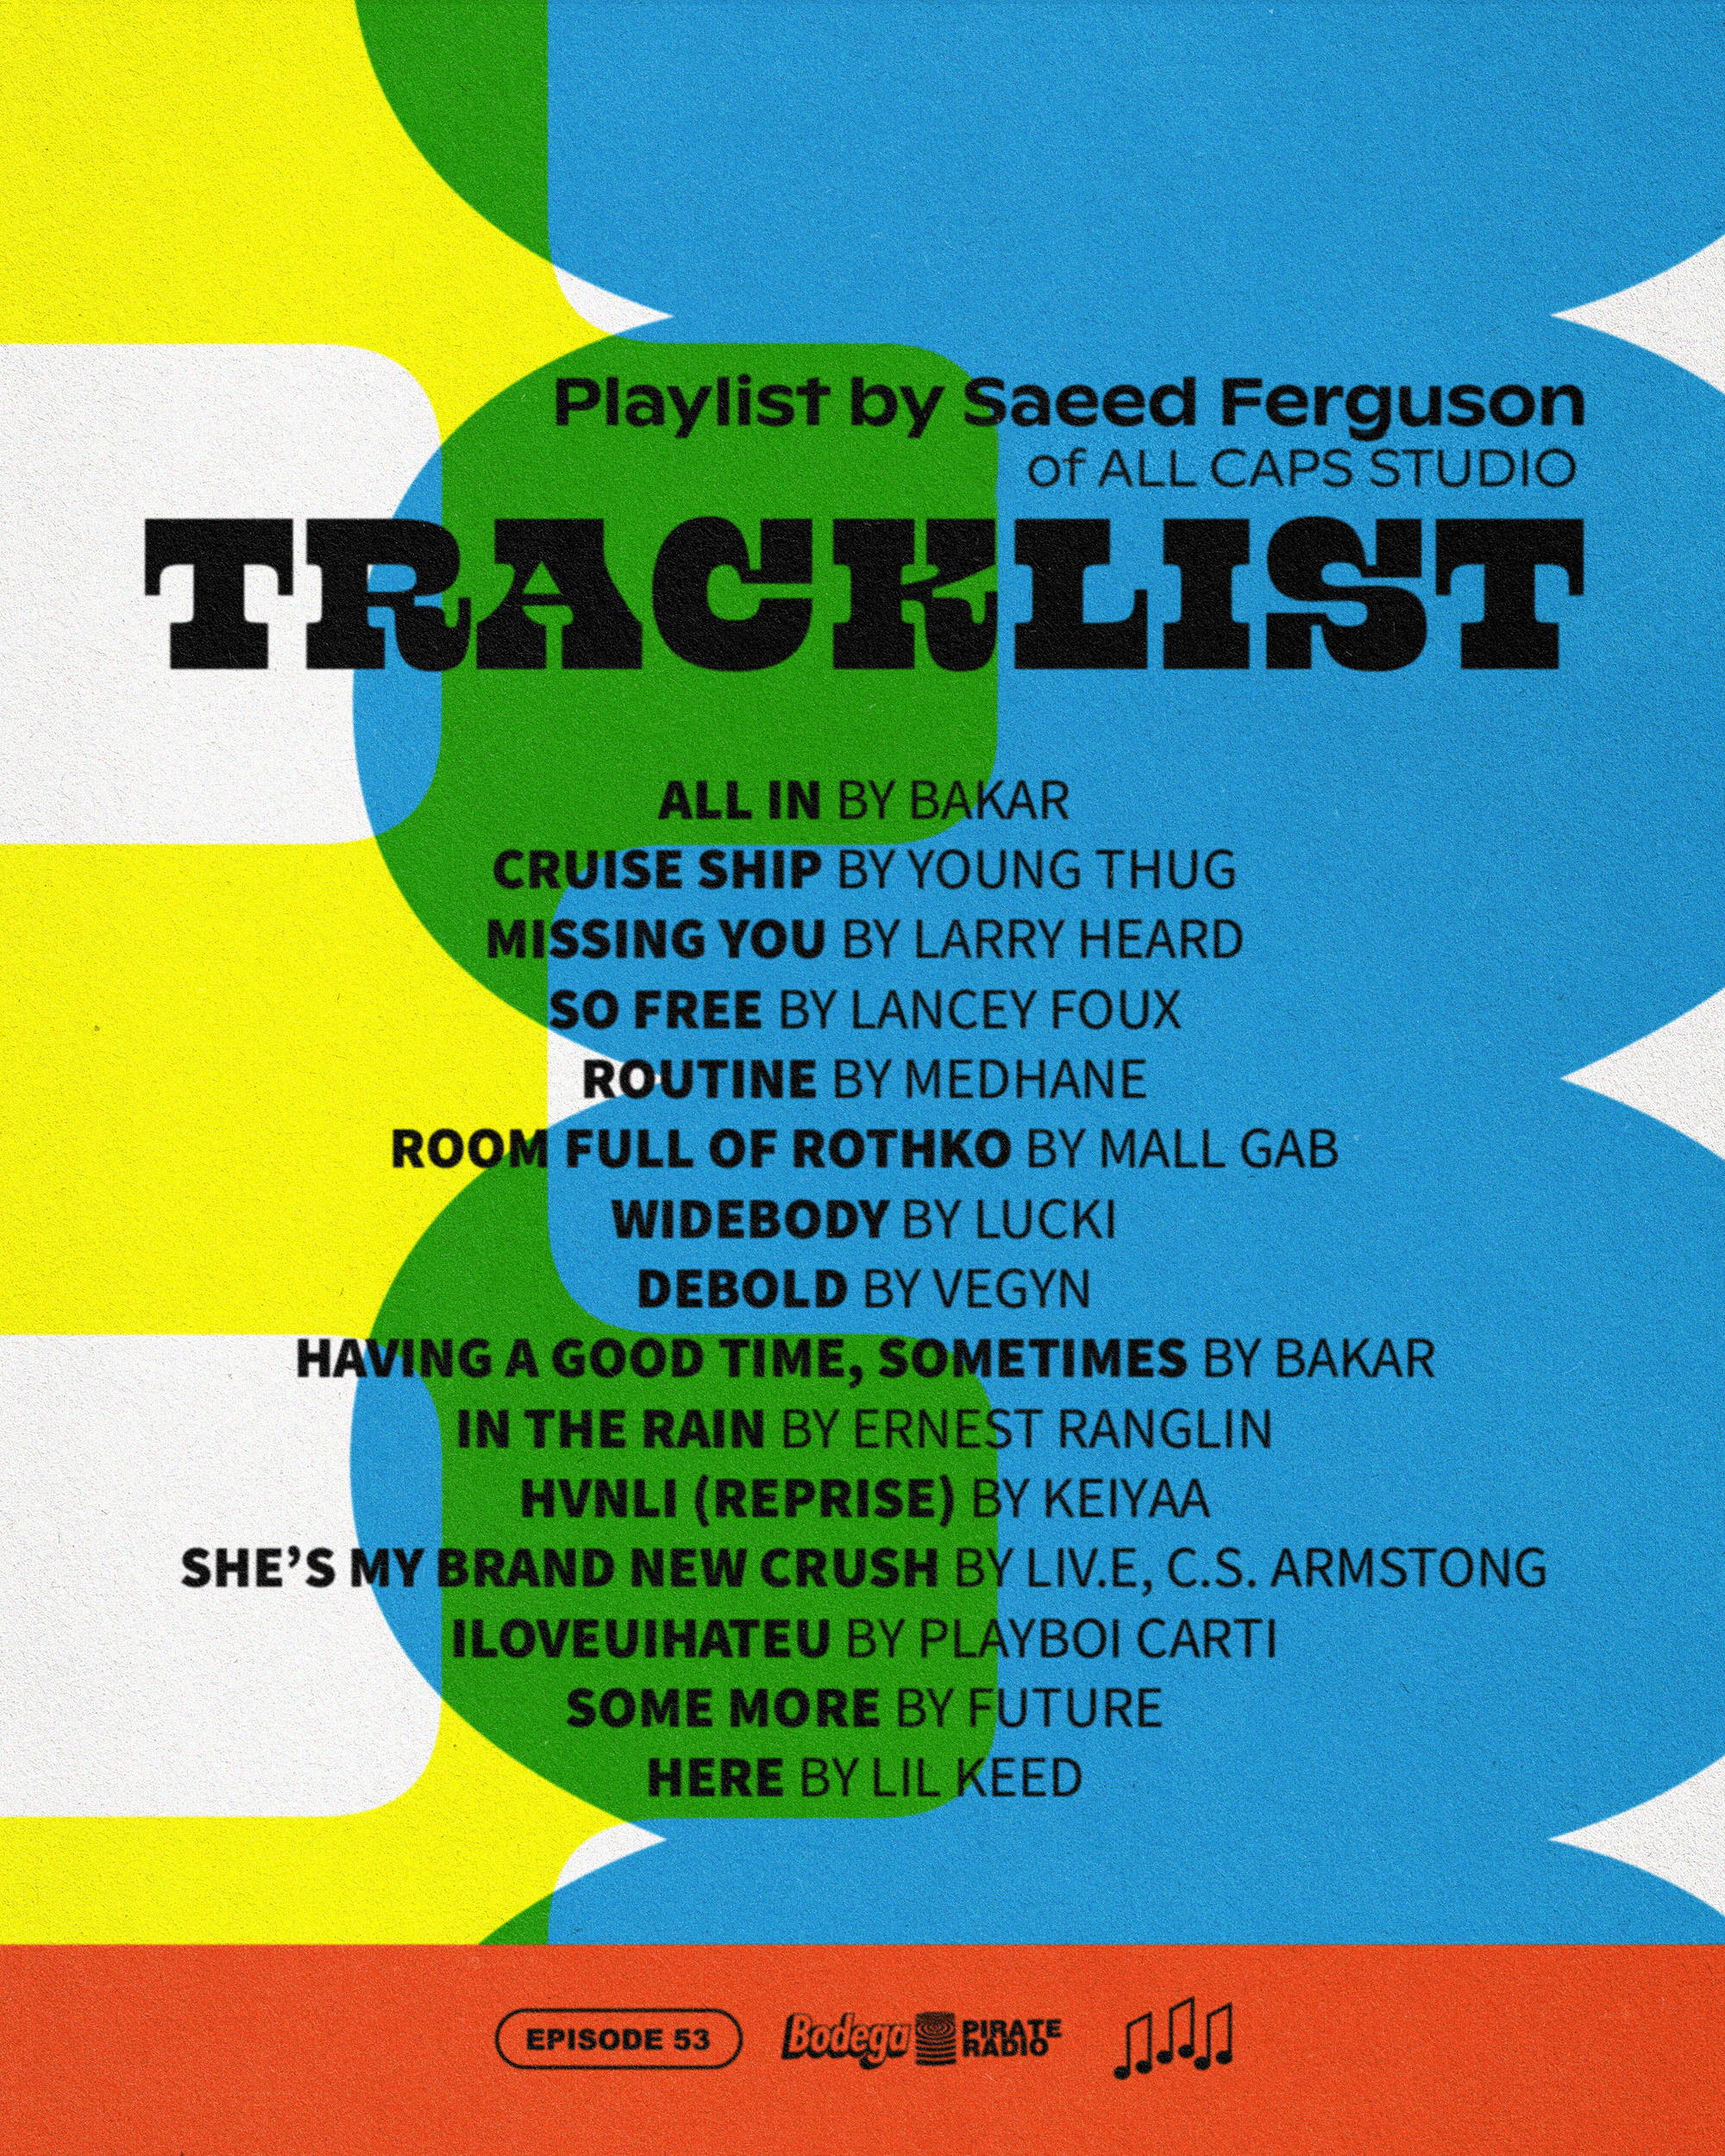 EPISODE #53: EXCLUSIVE PLAYLIST BY SAEED FERGUSON